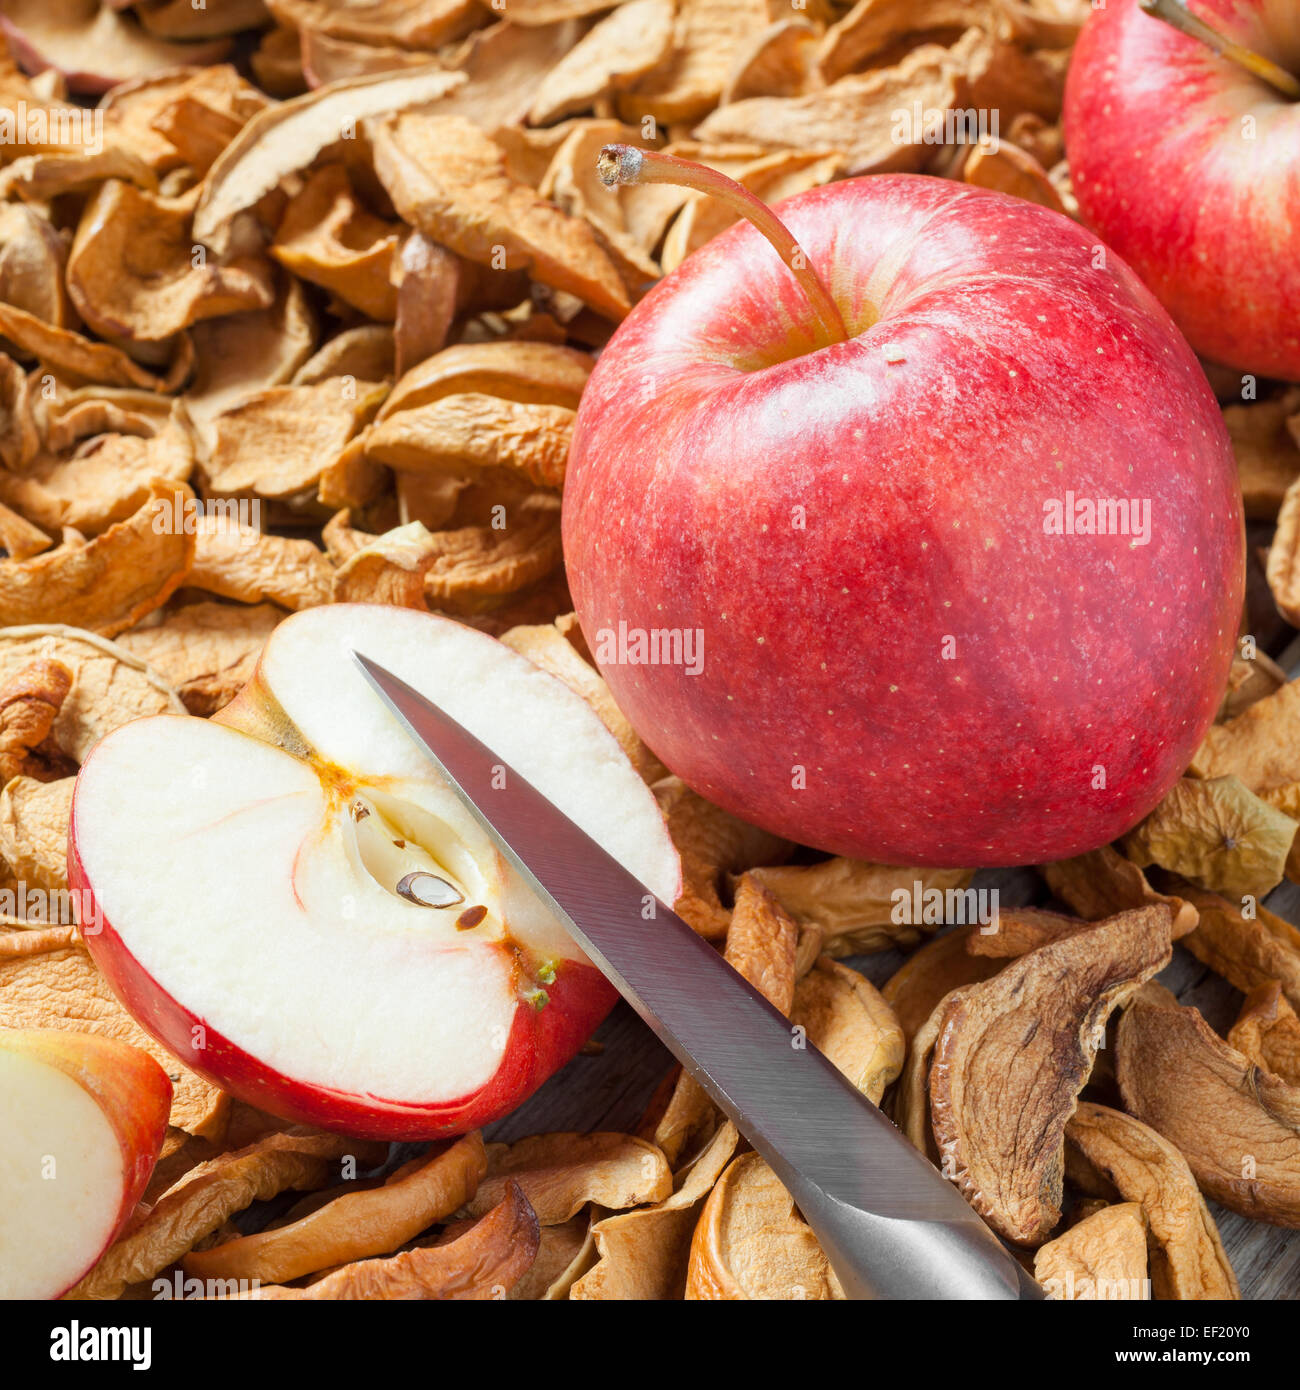 dried apple slices, knife and red fresh red apple fruit close up Stock Photo